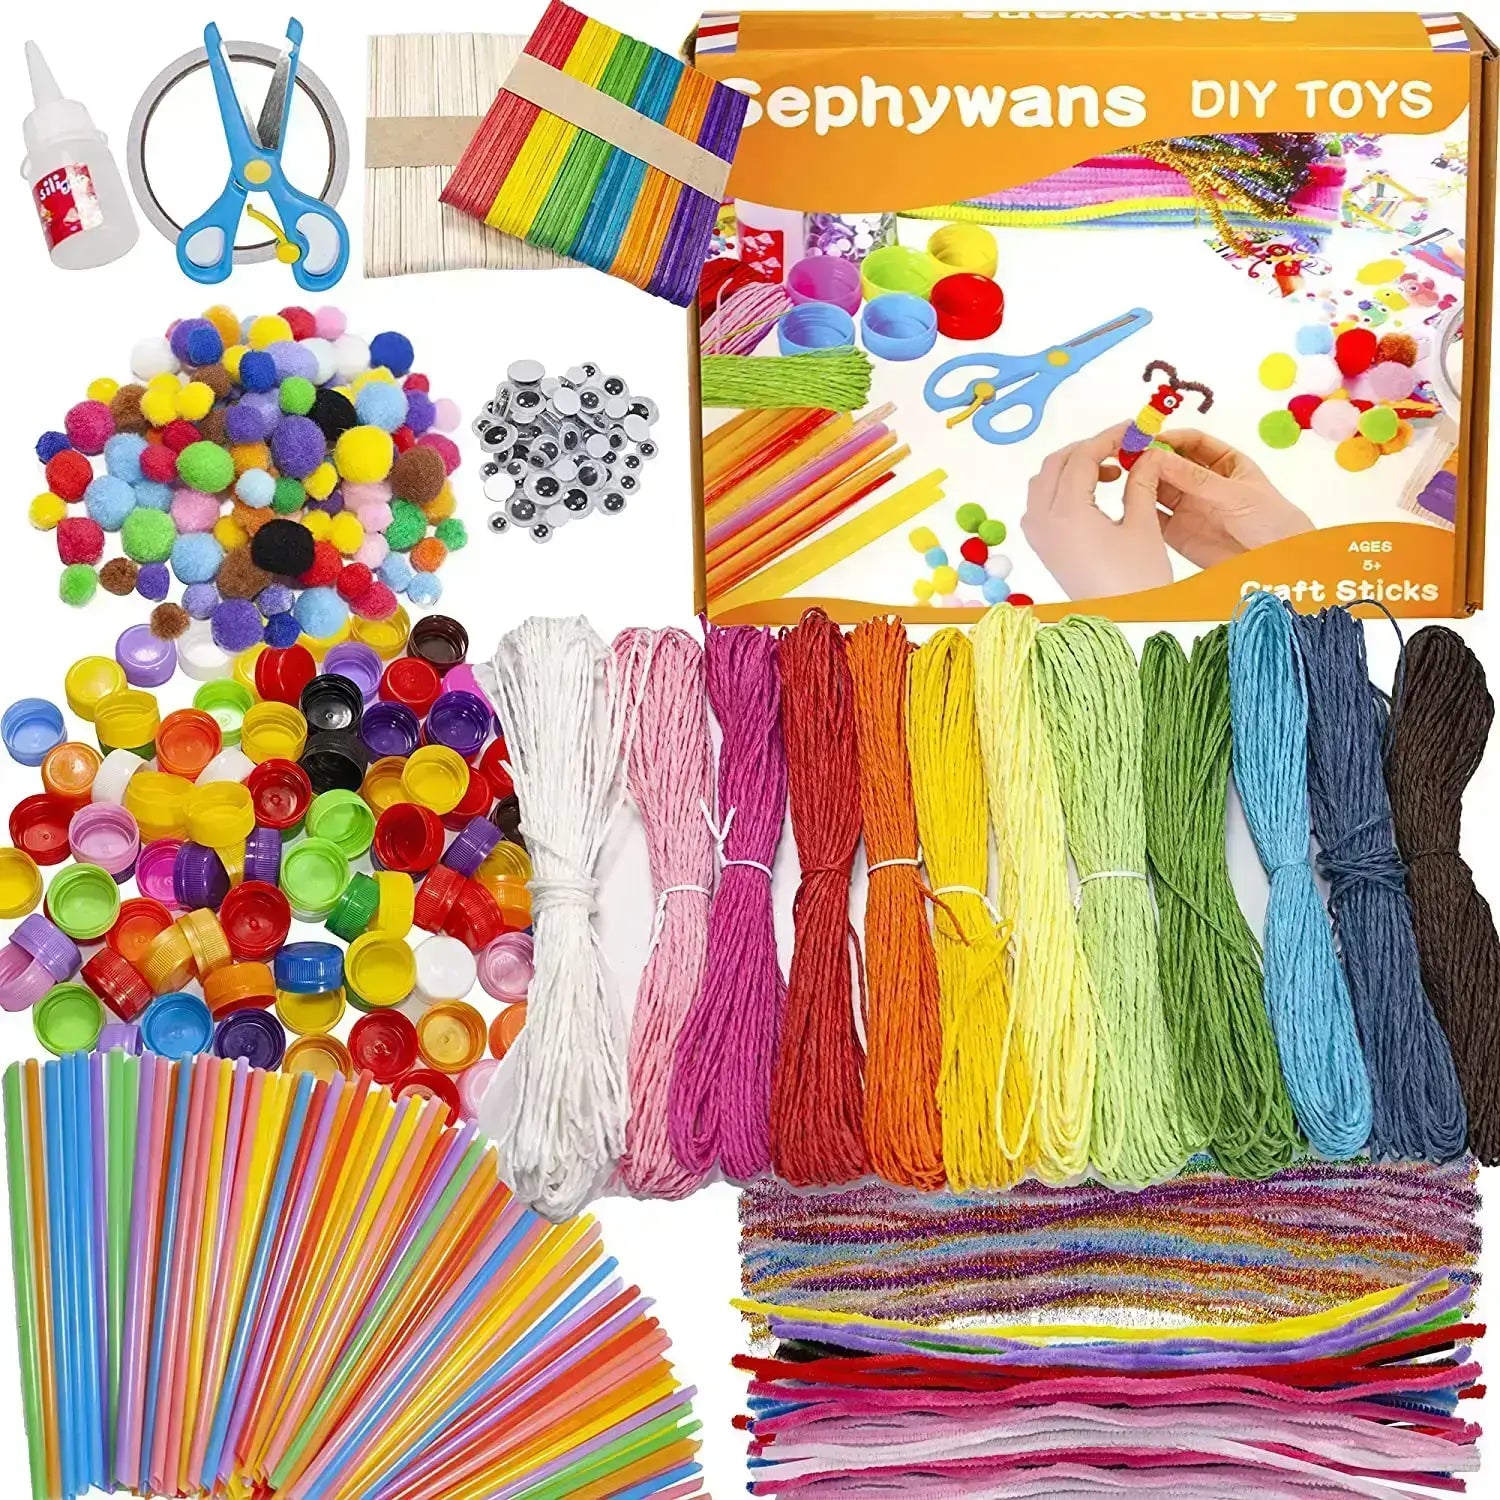 Sephywans Arts and Crafts Supplies Kit, Include Variety of Materials w –  Sephywanstoys